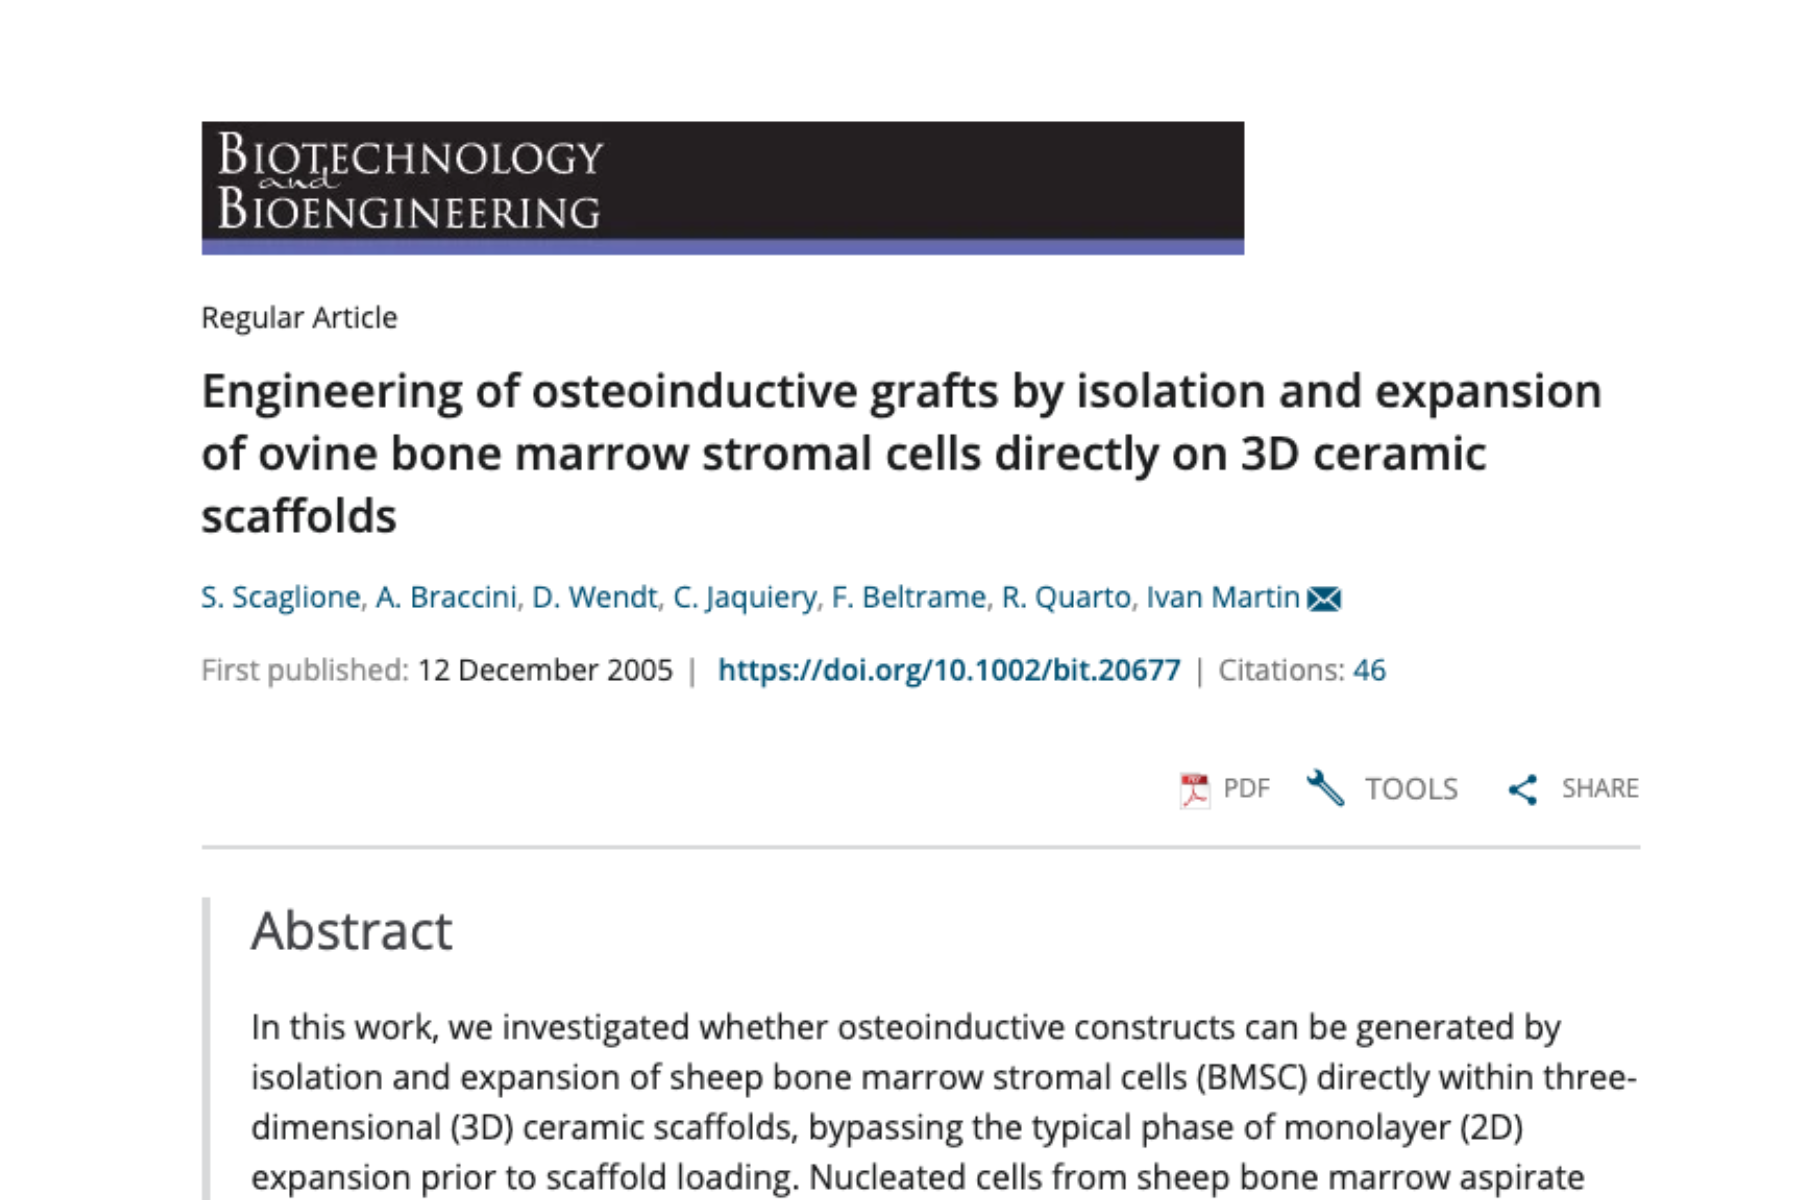 Engineering osteoinductive grafts